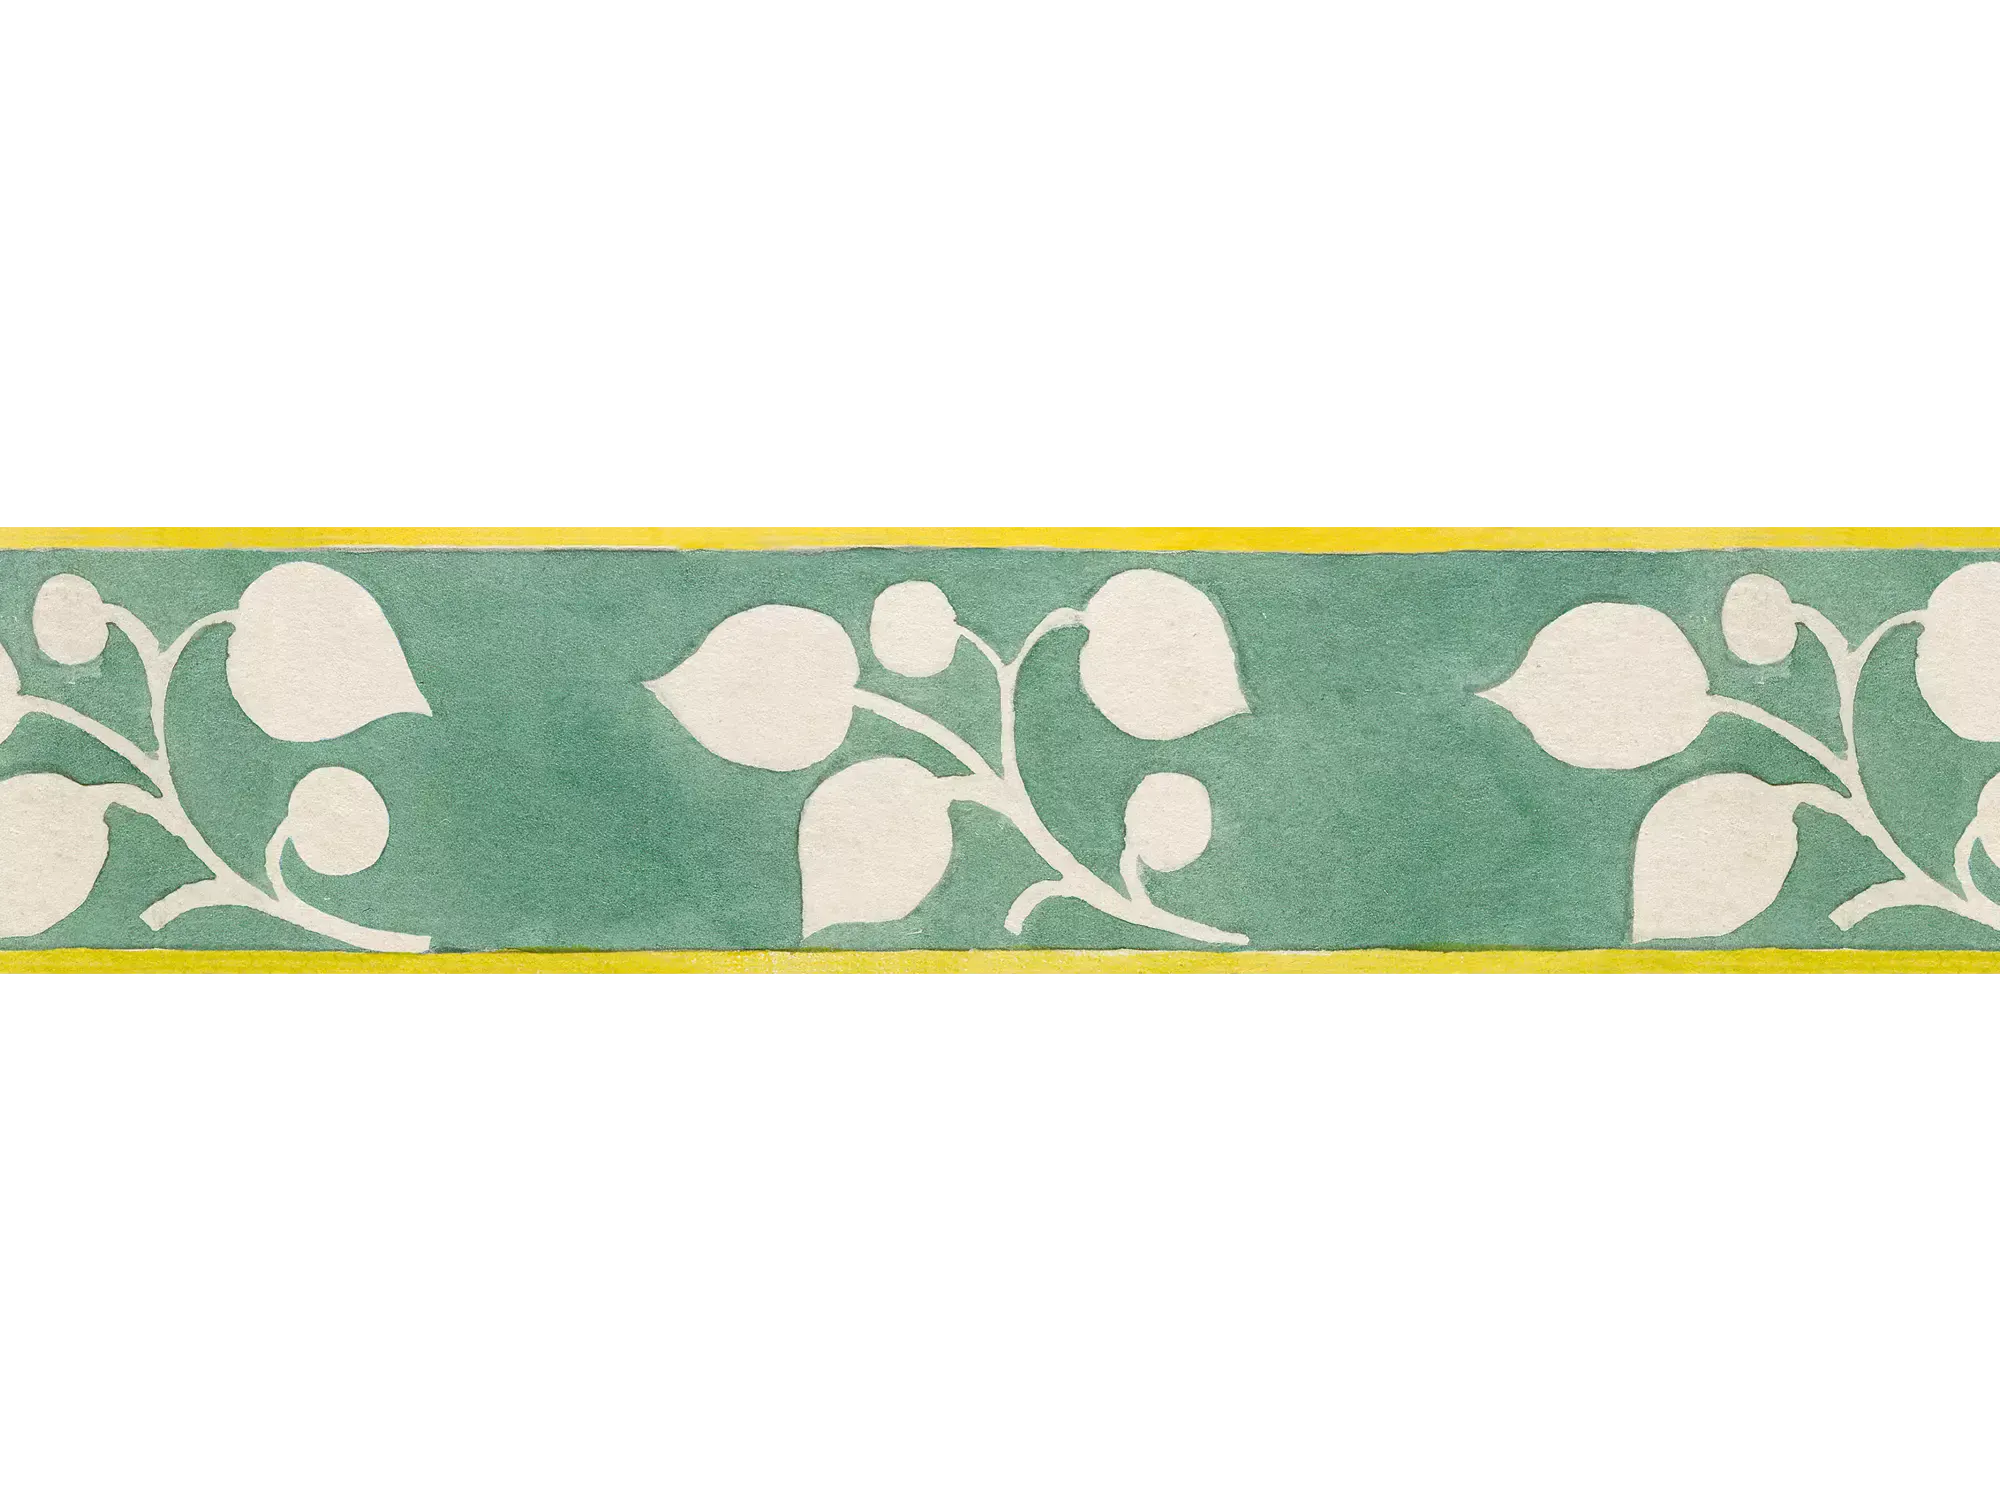 Striped green and yellow flowered wallpaper border from 1918 by Arts & Crafts artist CFA Voysey